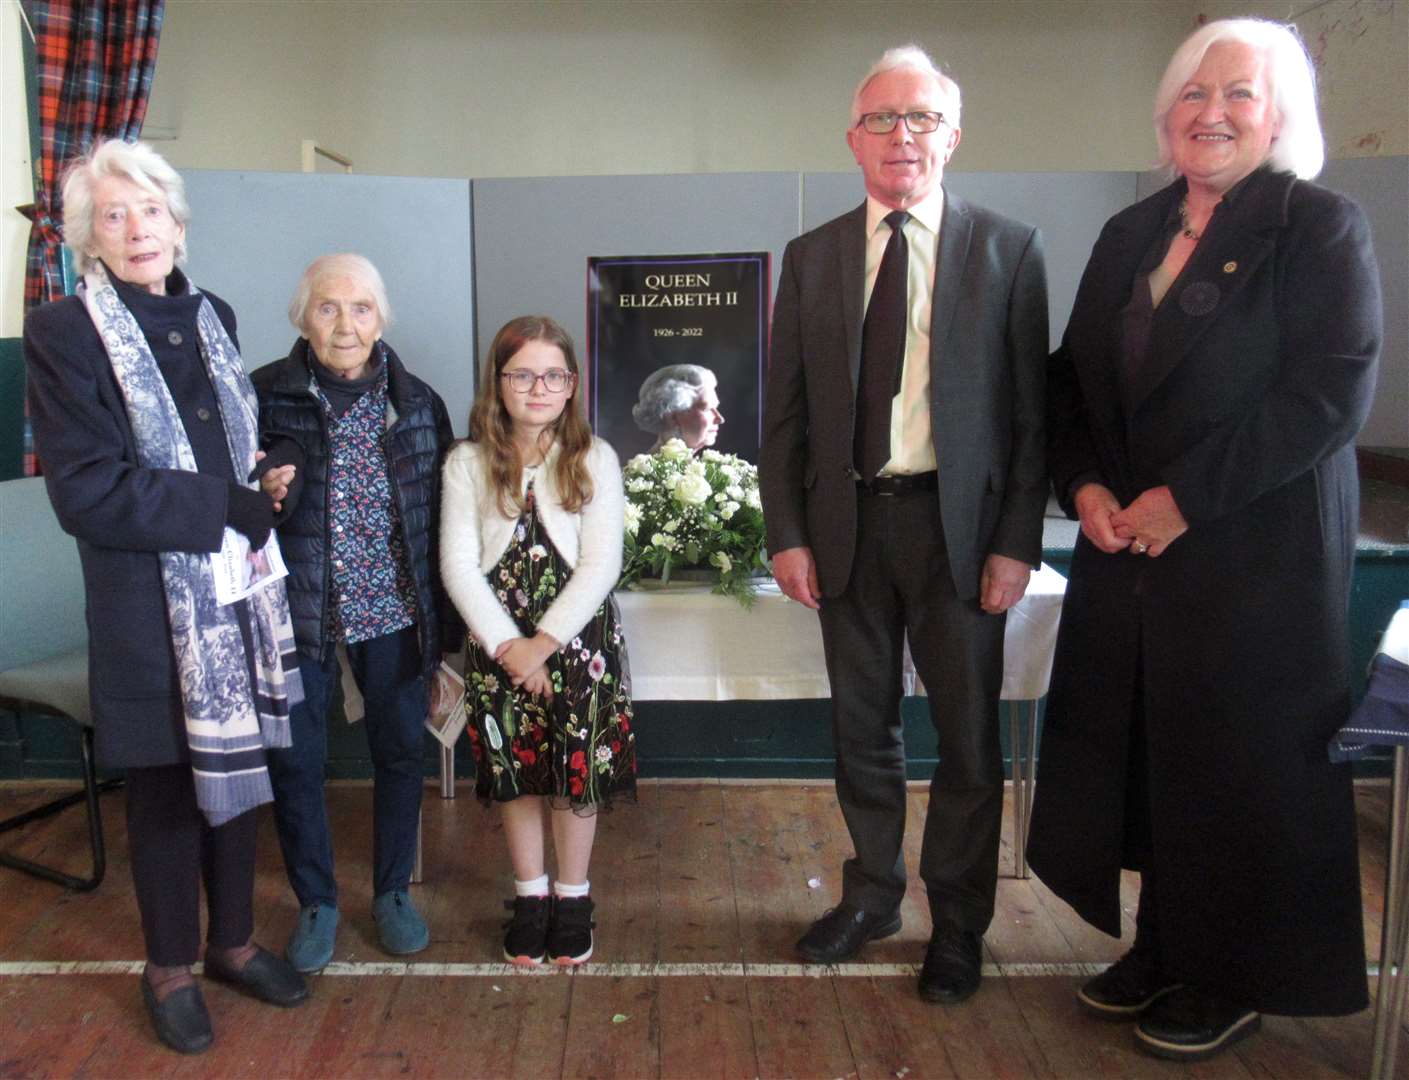 A thanksgiving service at Melness saw wreaths laid in memory of Queen Elizabeth II: From left, Joan (Nana) Gallagher, Yvette Brown, Mia Martin, Dr Robin Taylor, and Frances Gunn.